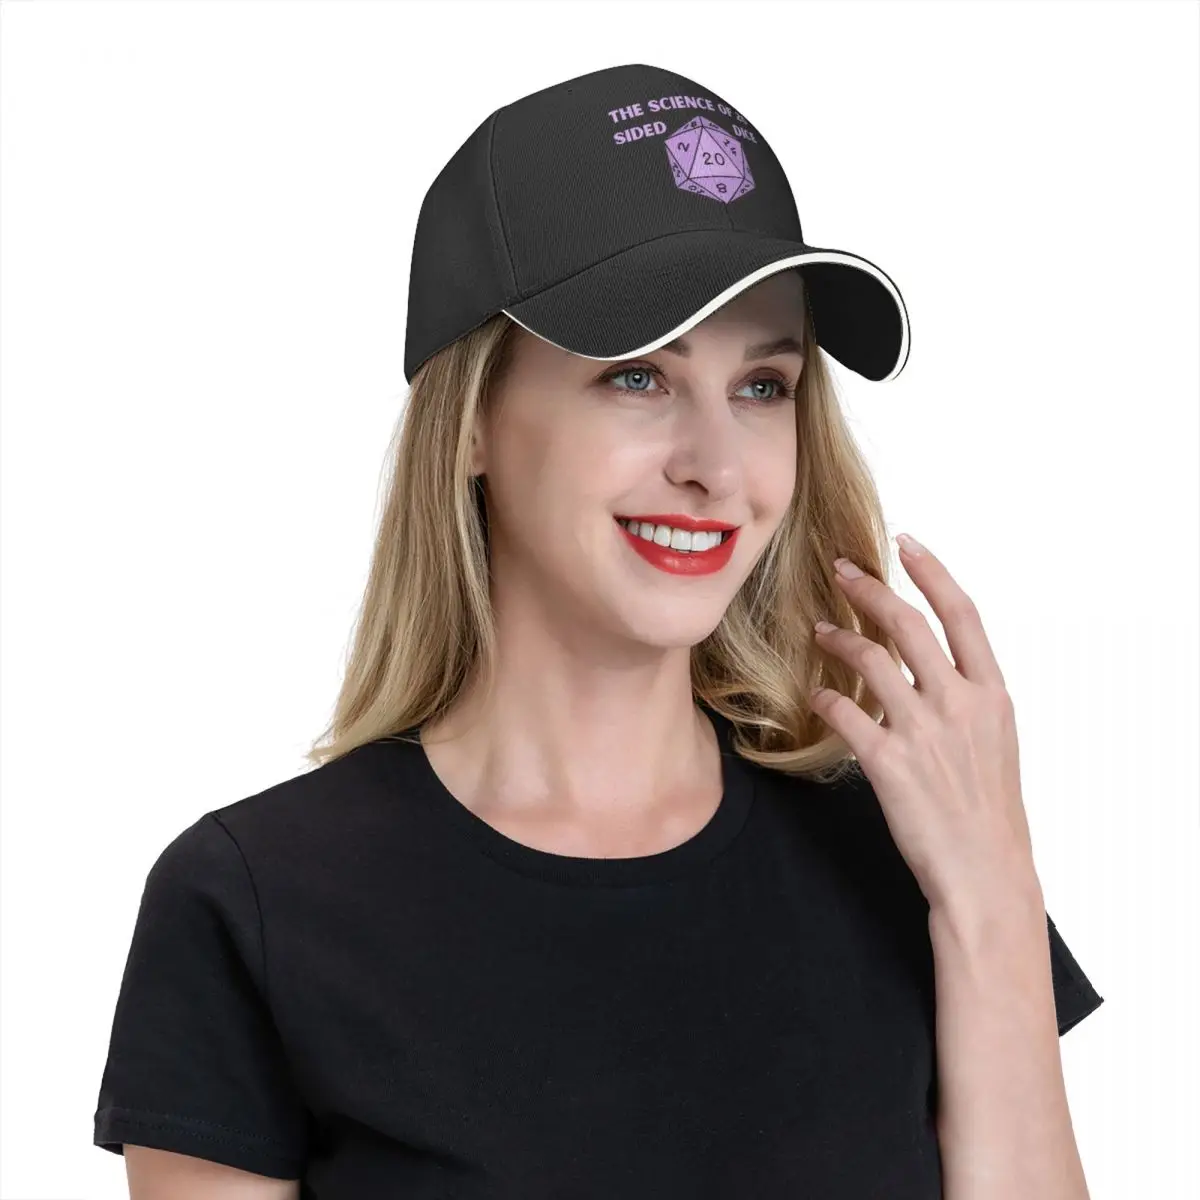 

Casquette Copy Of The Science Of 20 Sided Dice Essential Golf hip hop Hats Unique Daily Unisex Black Headgear